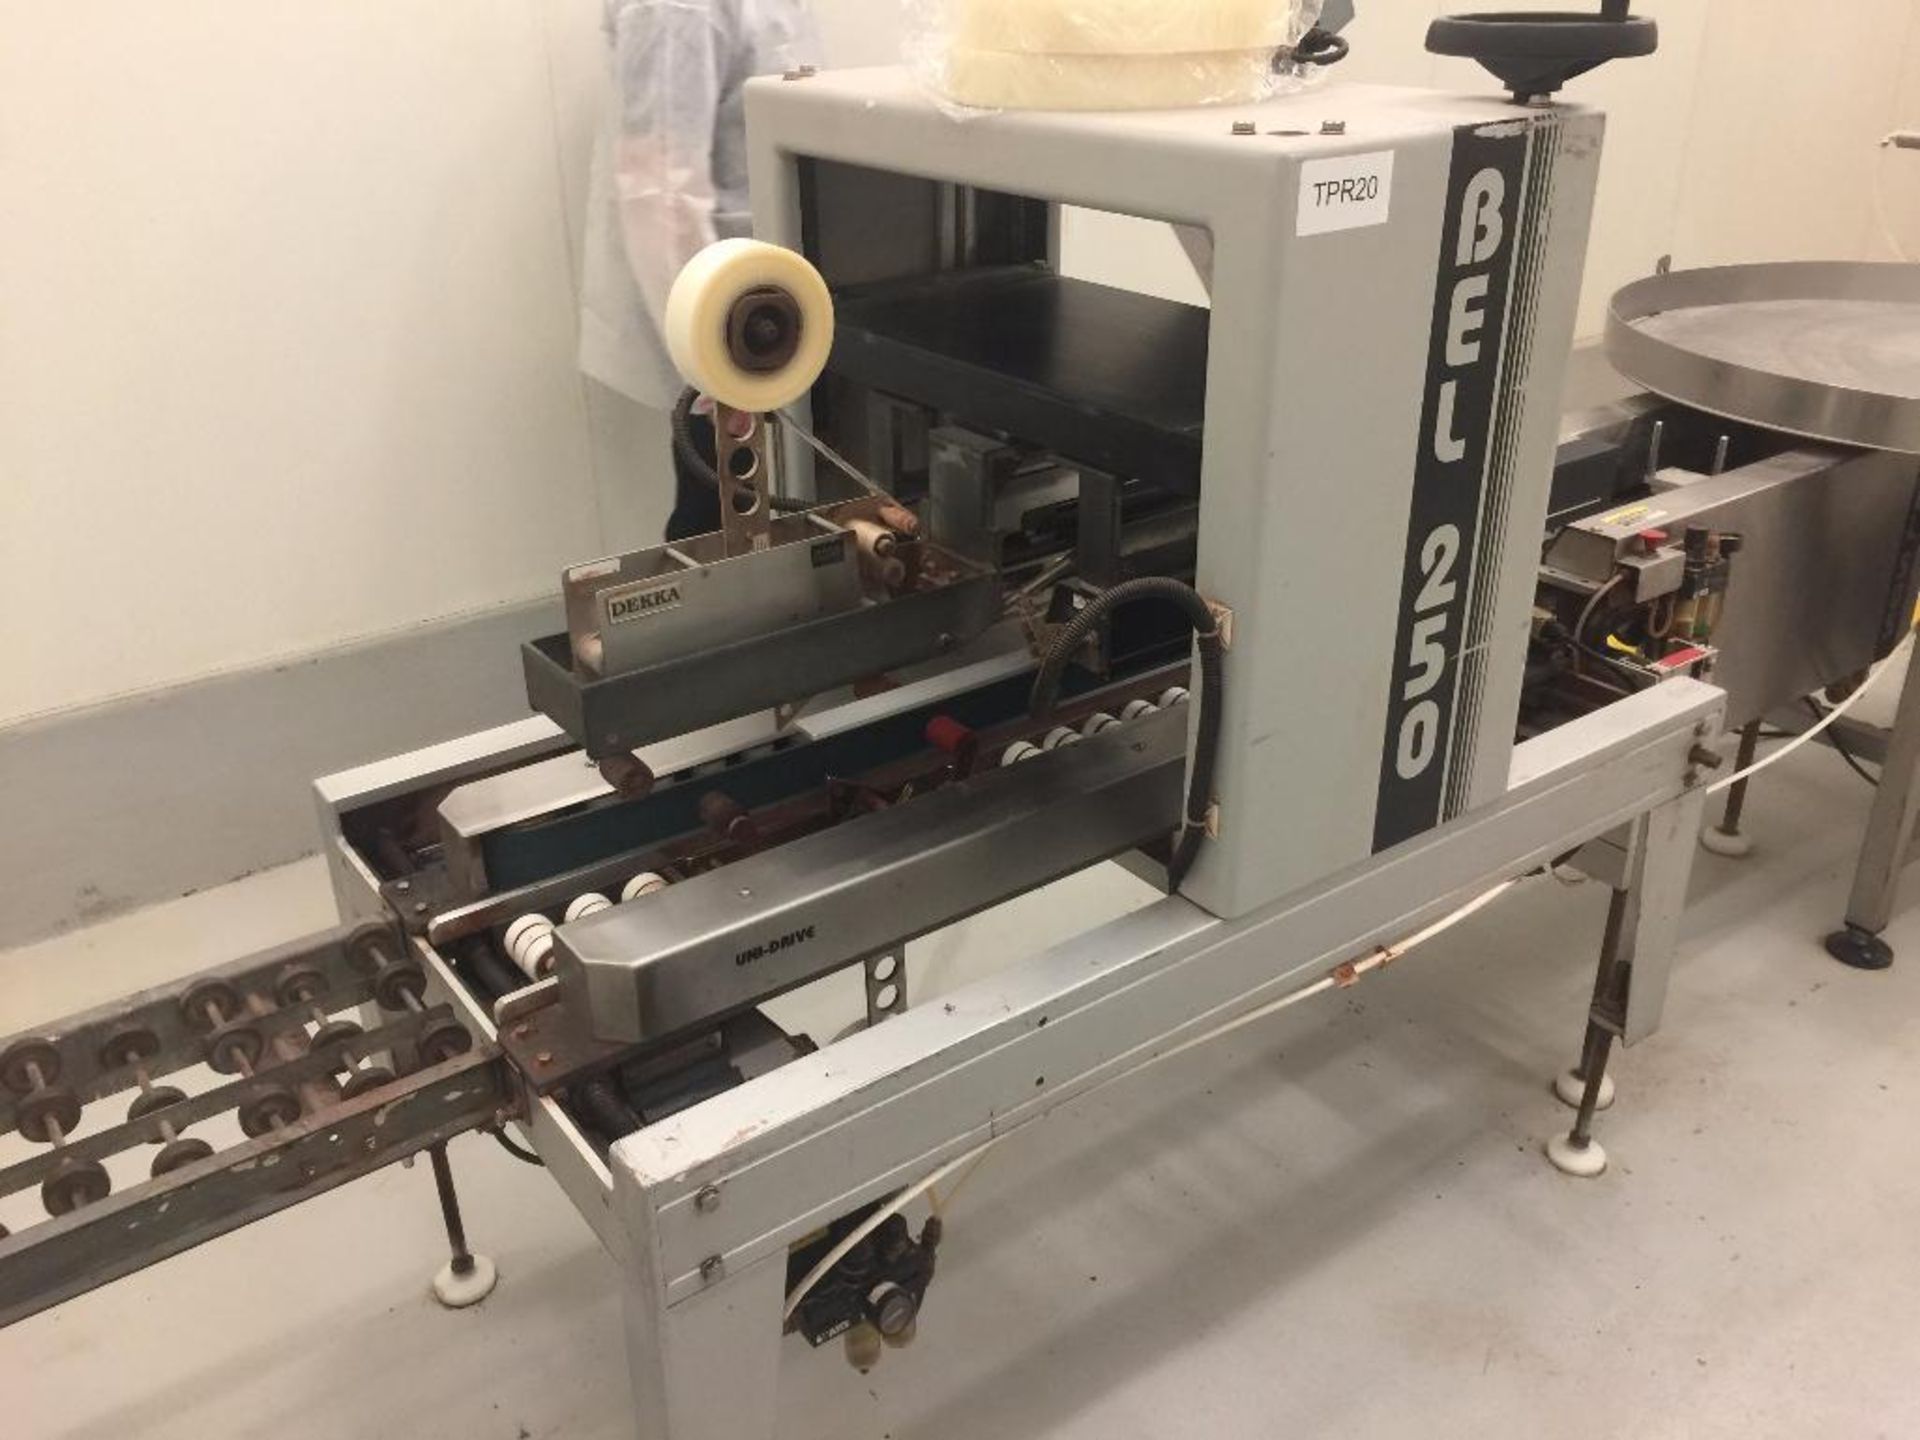 Bel 250 semi automatic case sealer, top and bottom tape heads. (TRP20), Belcor case former, model 50